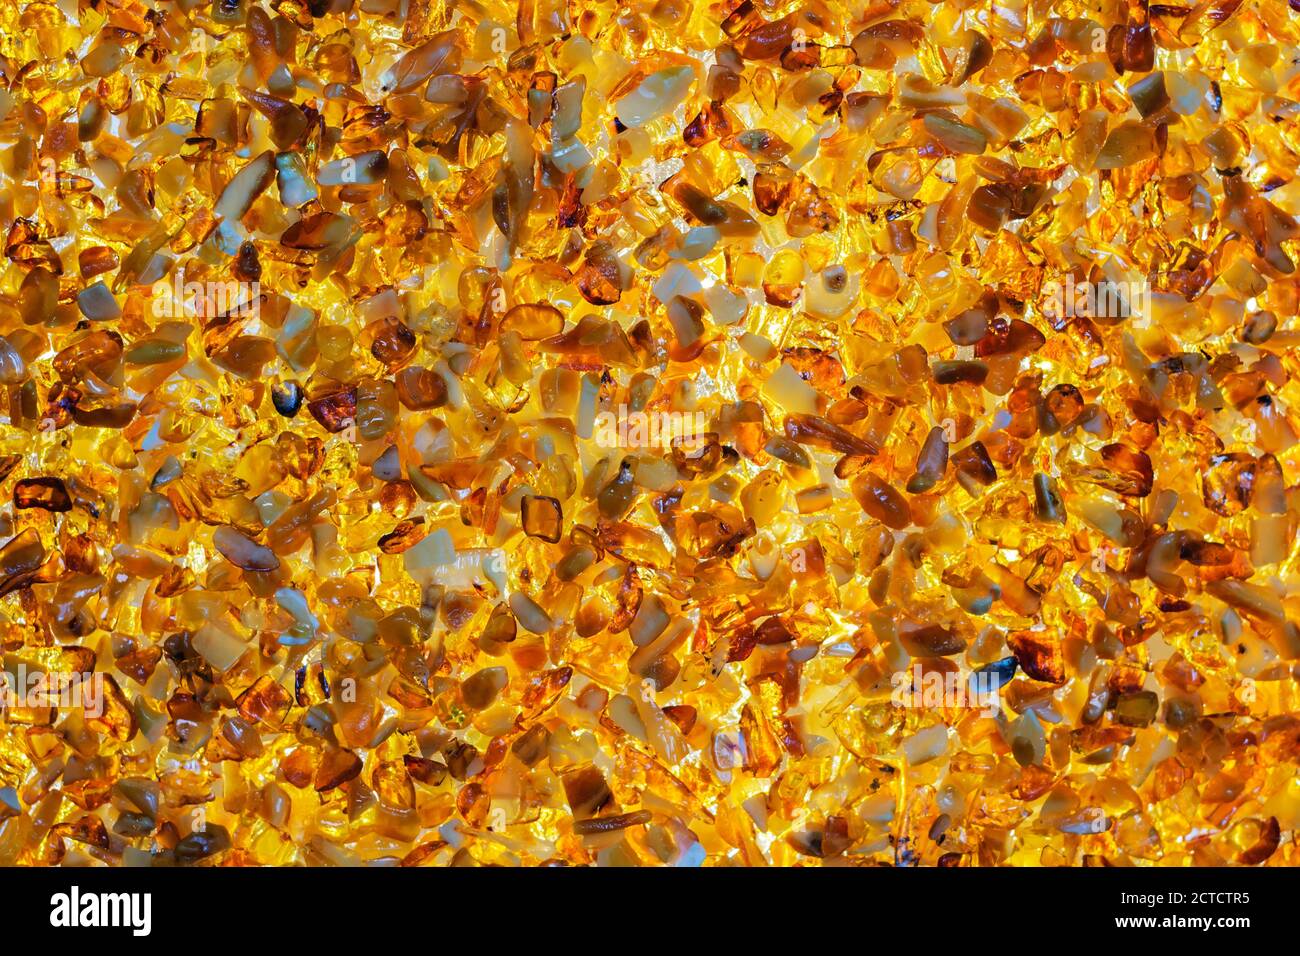 Amber stones from the beach of the Baltic Sea Stock Photo